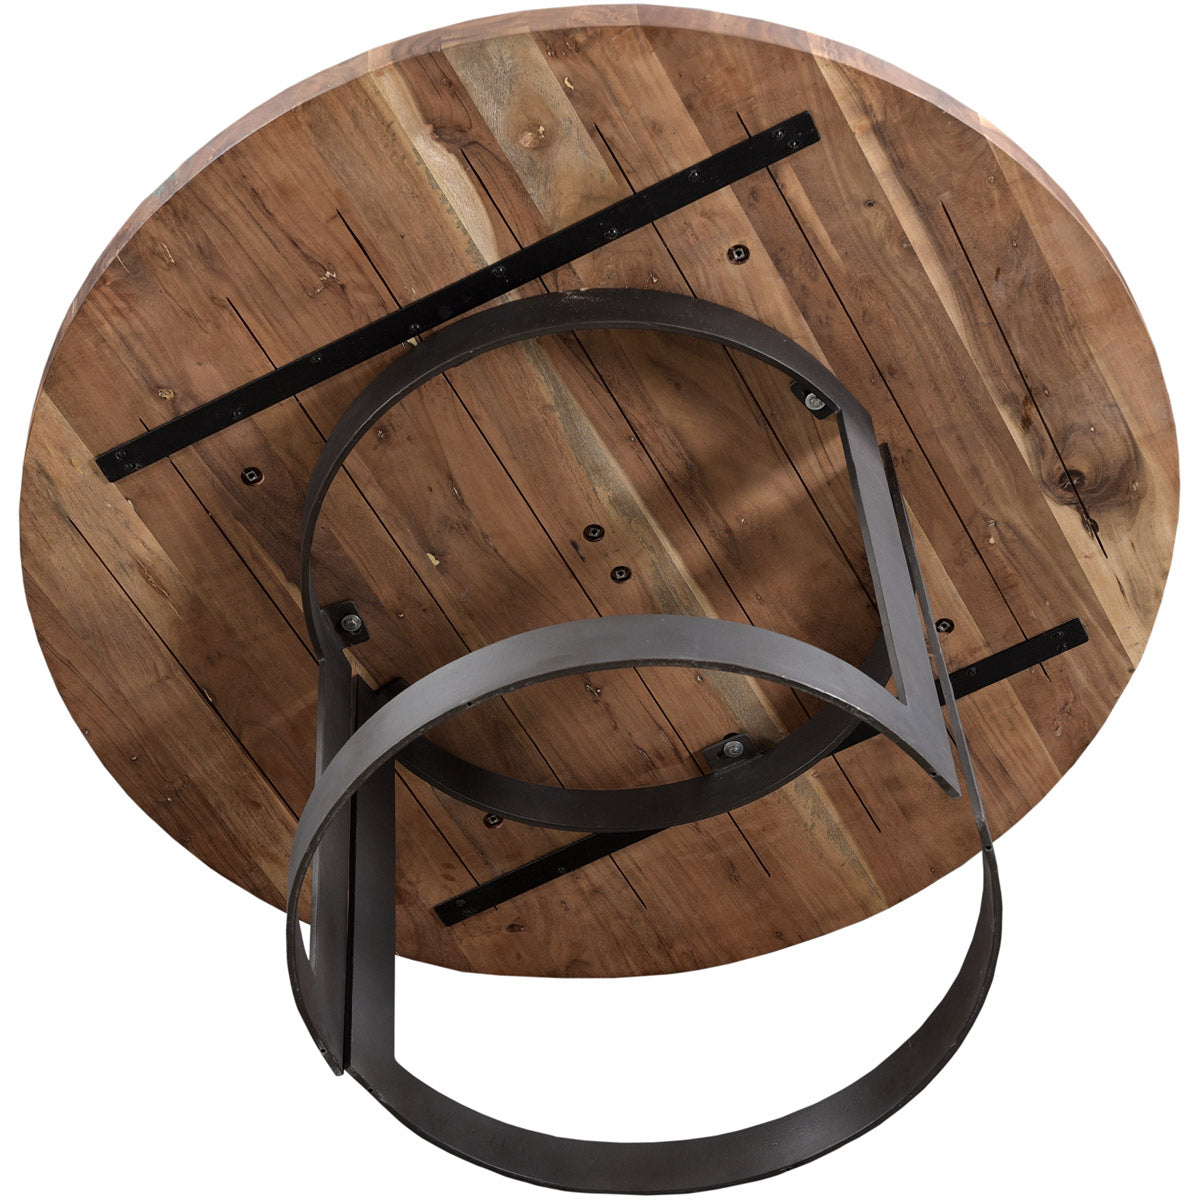 Bent Round Dining Table